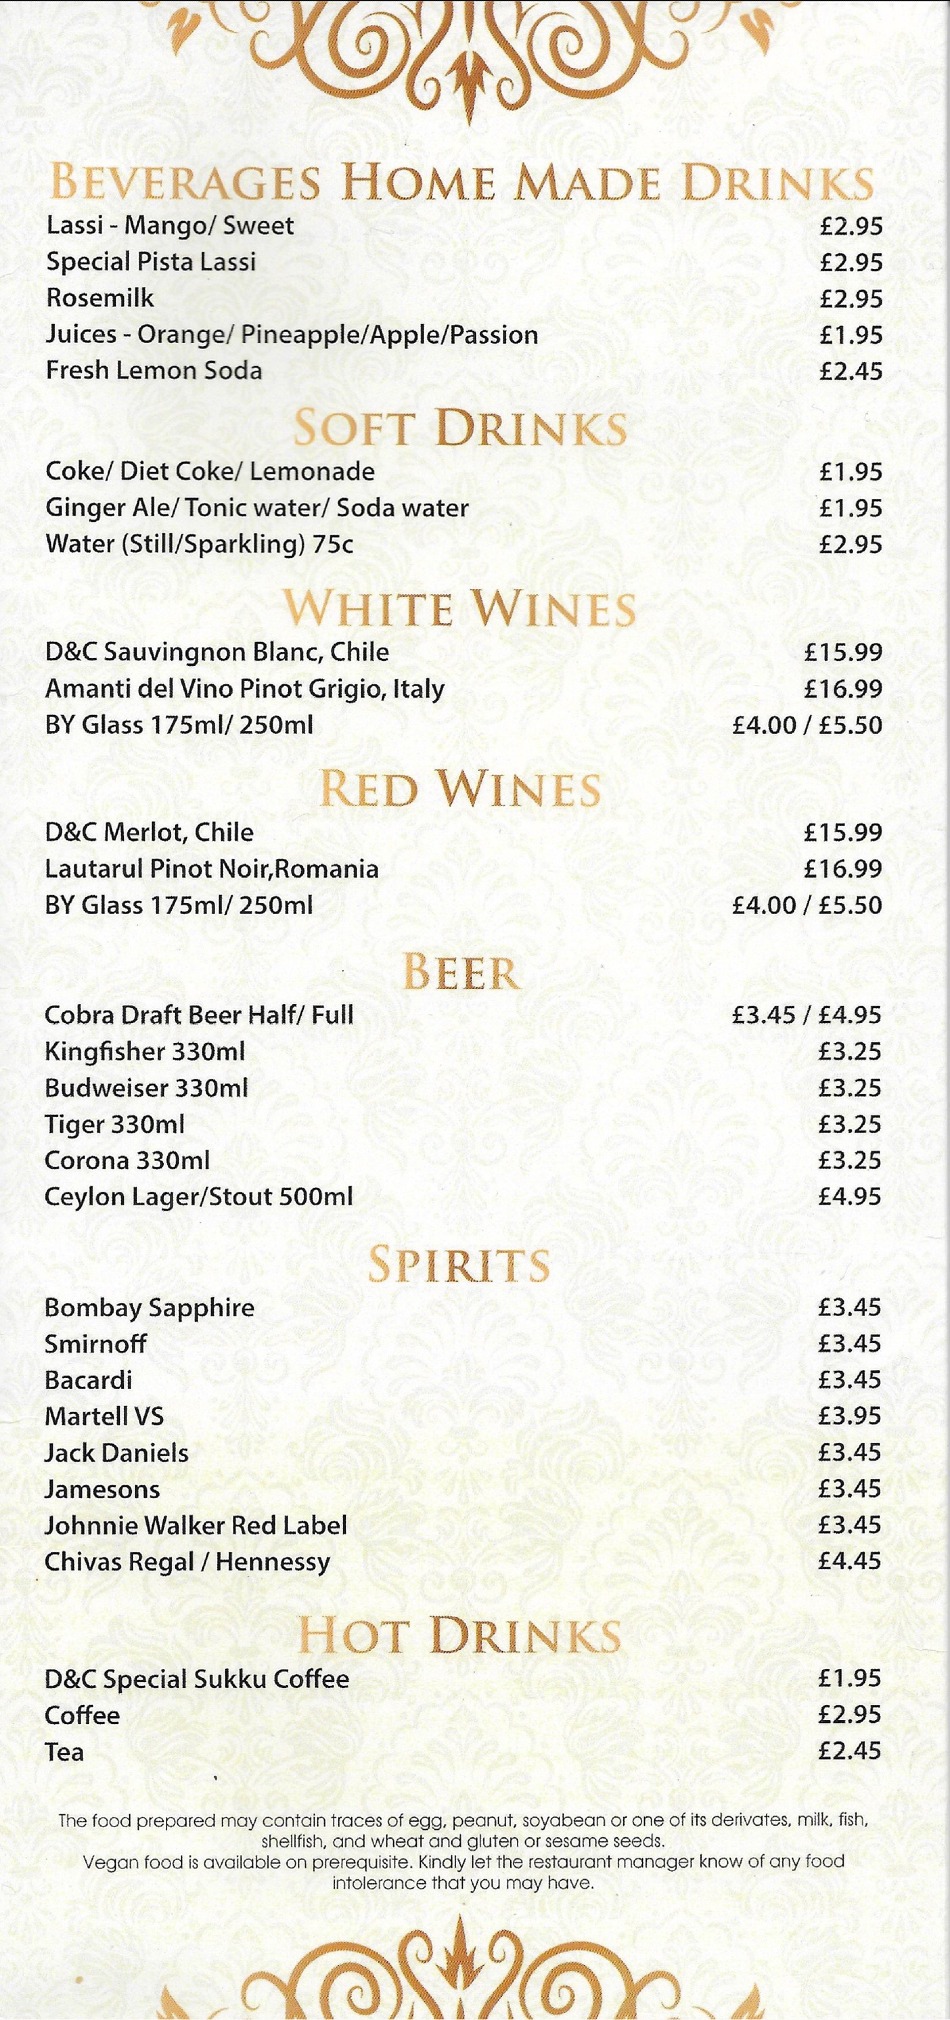 Takeaway Restaurant Menu Page - Dosa and Chutney South Indian restaurant - Nottingham